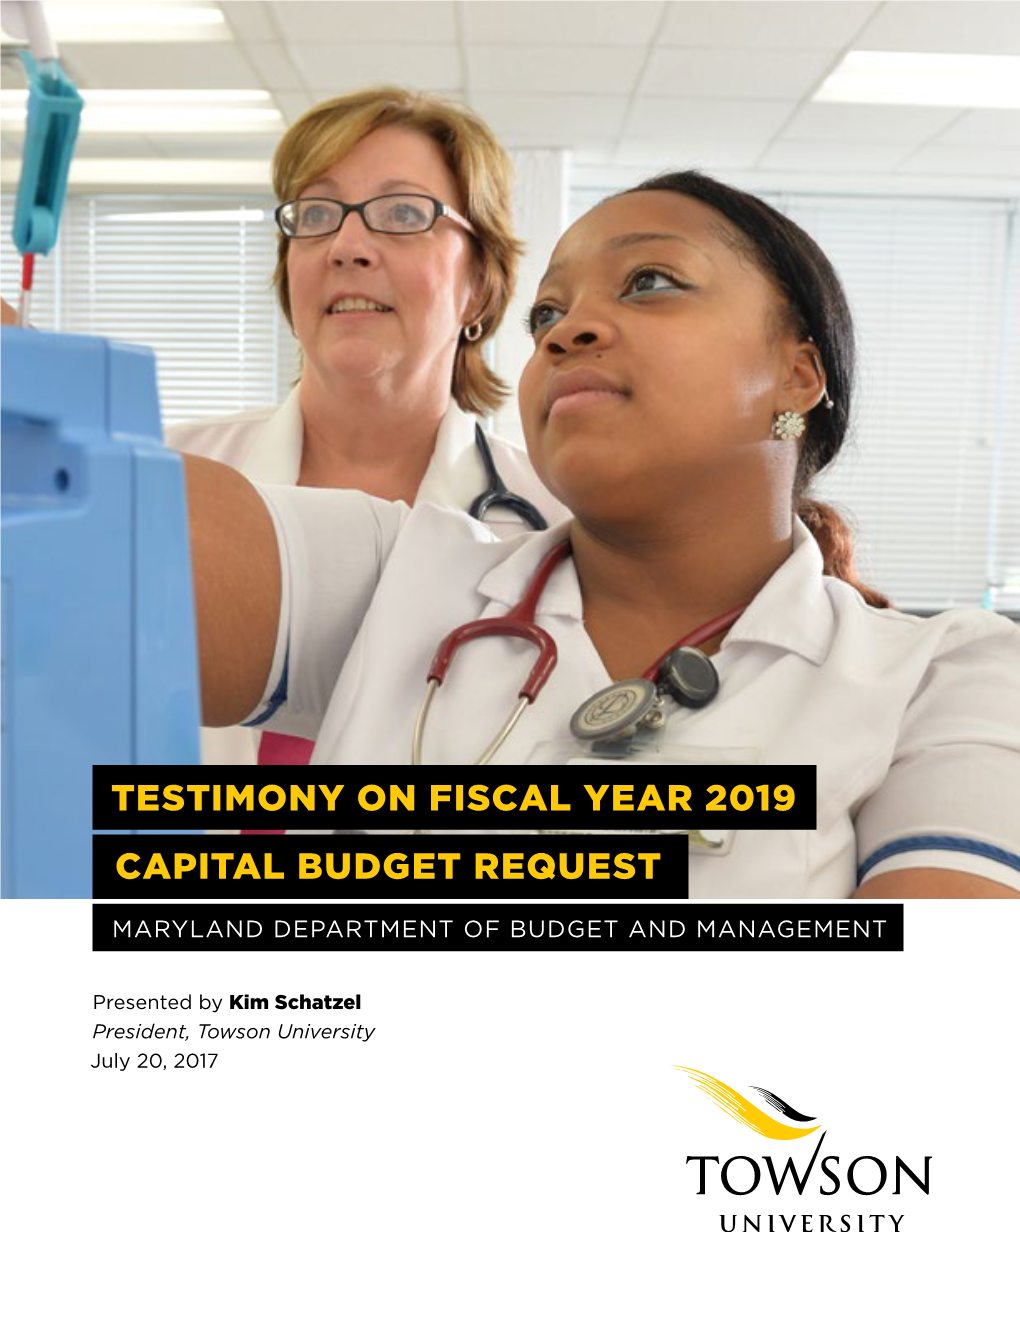 Testimony on Fiscal Year 2019 Capital Budget Request